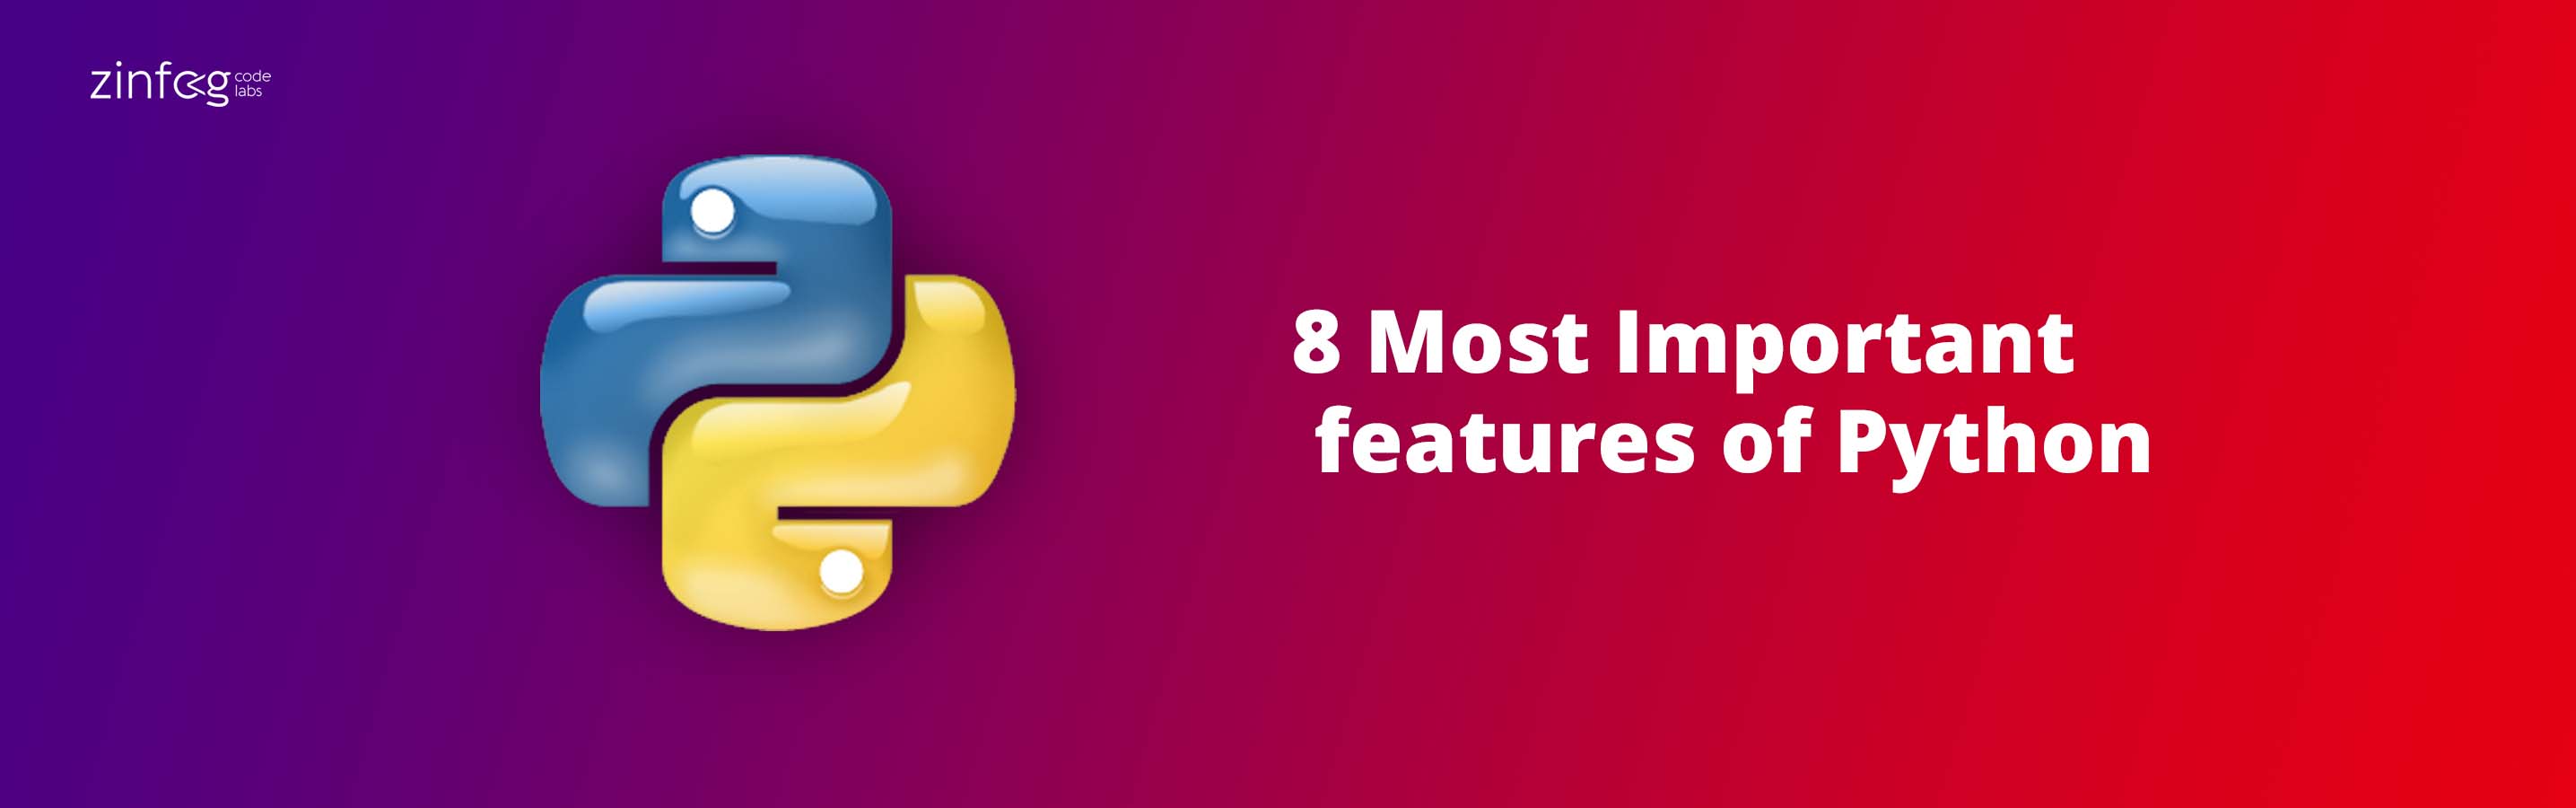 8_most_important_features_of_python.html